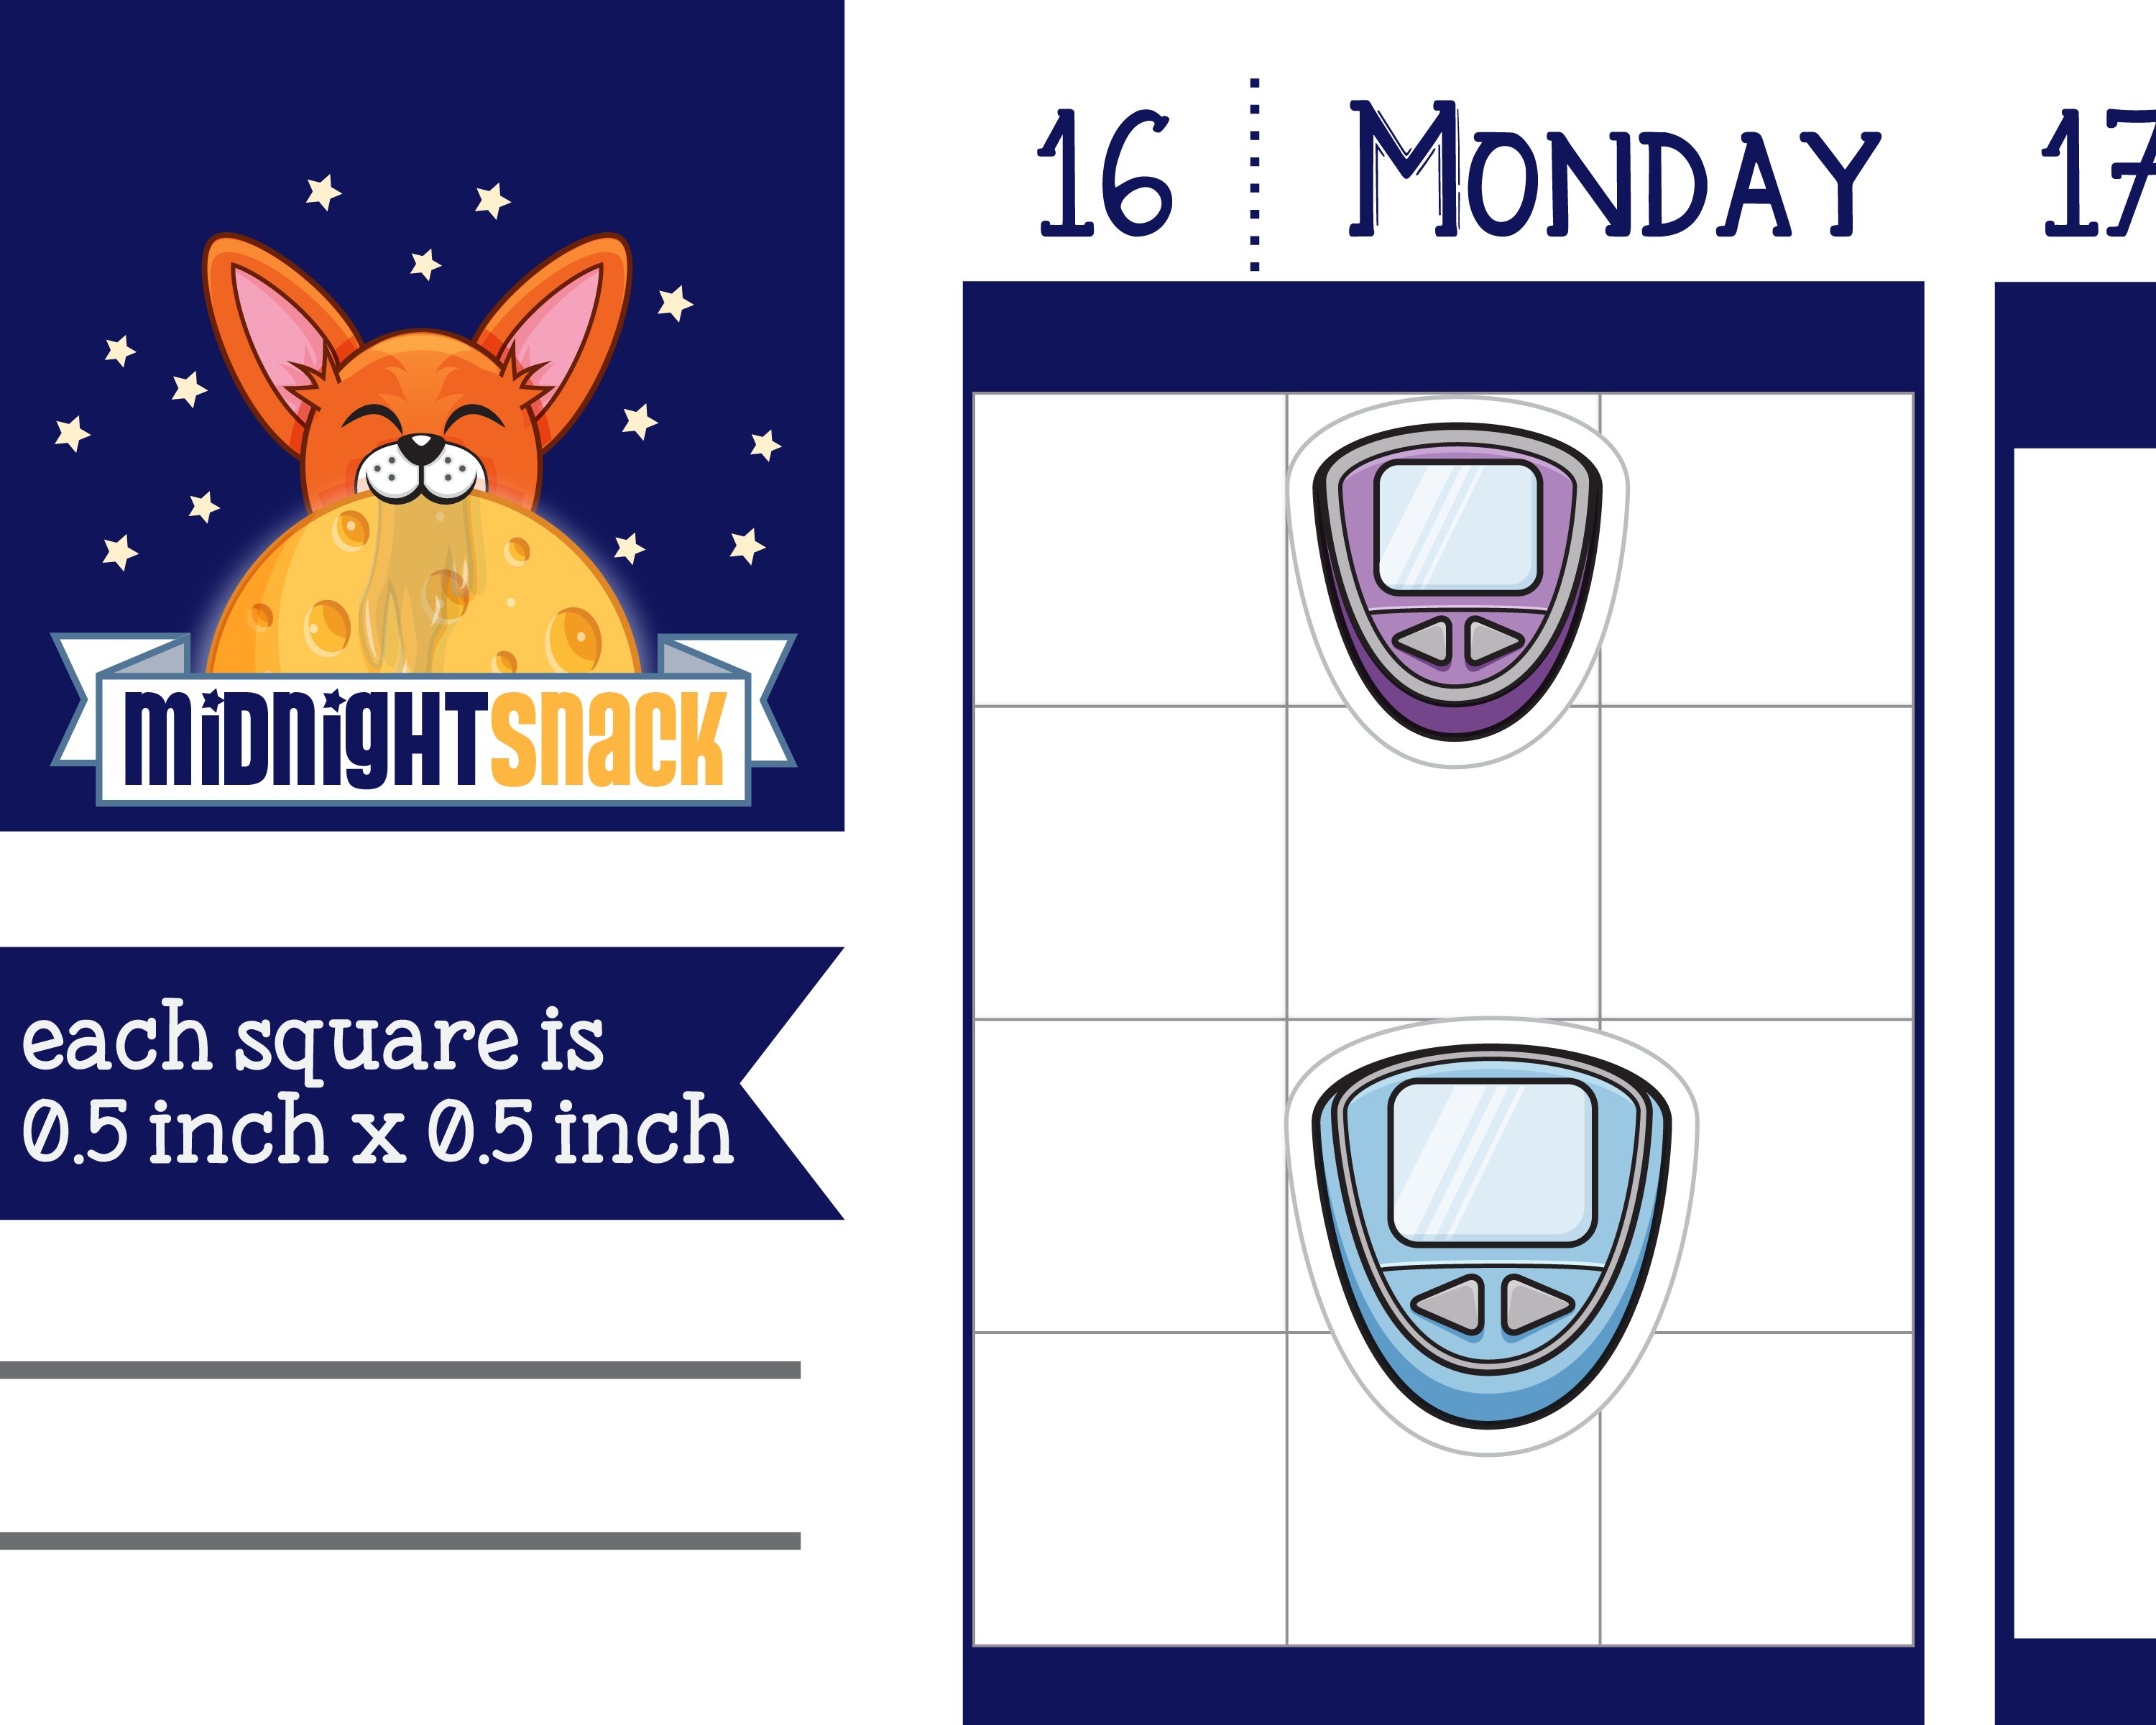 Small and Large Glucose Meter Icon Size: Diabetic Planner Stickers Midnight Snack Planner